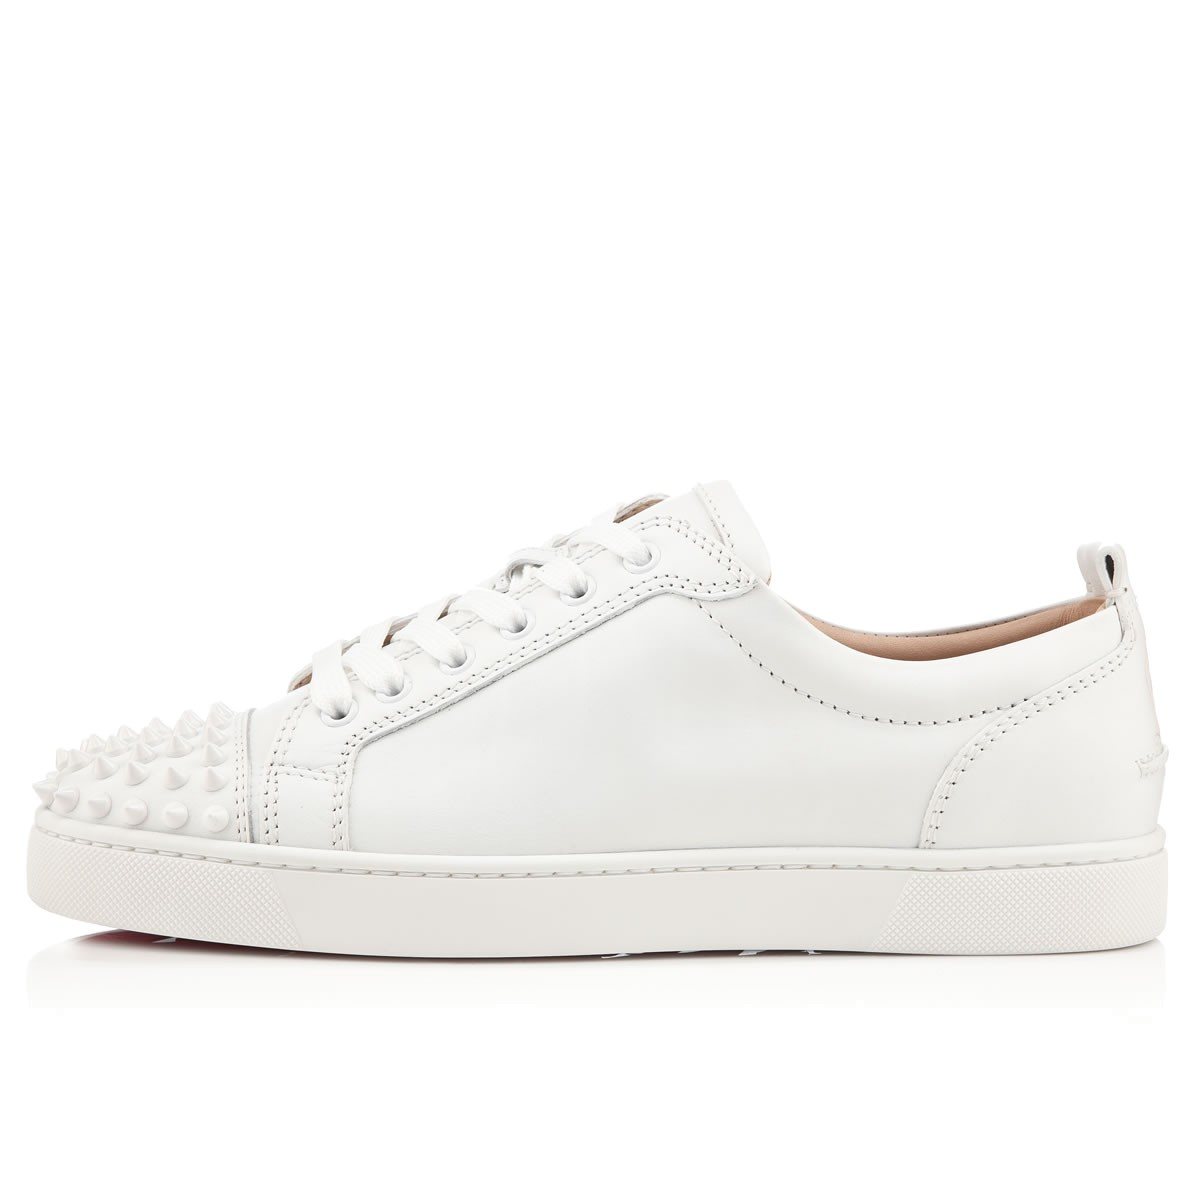 christian louboutin outlet uk genuine  